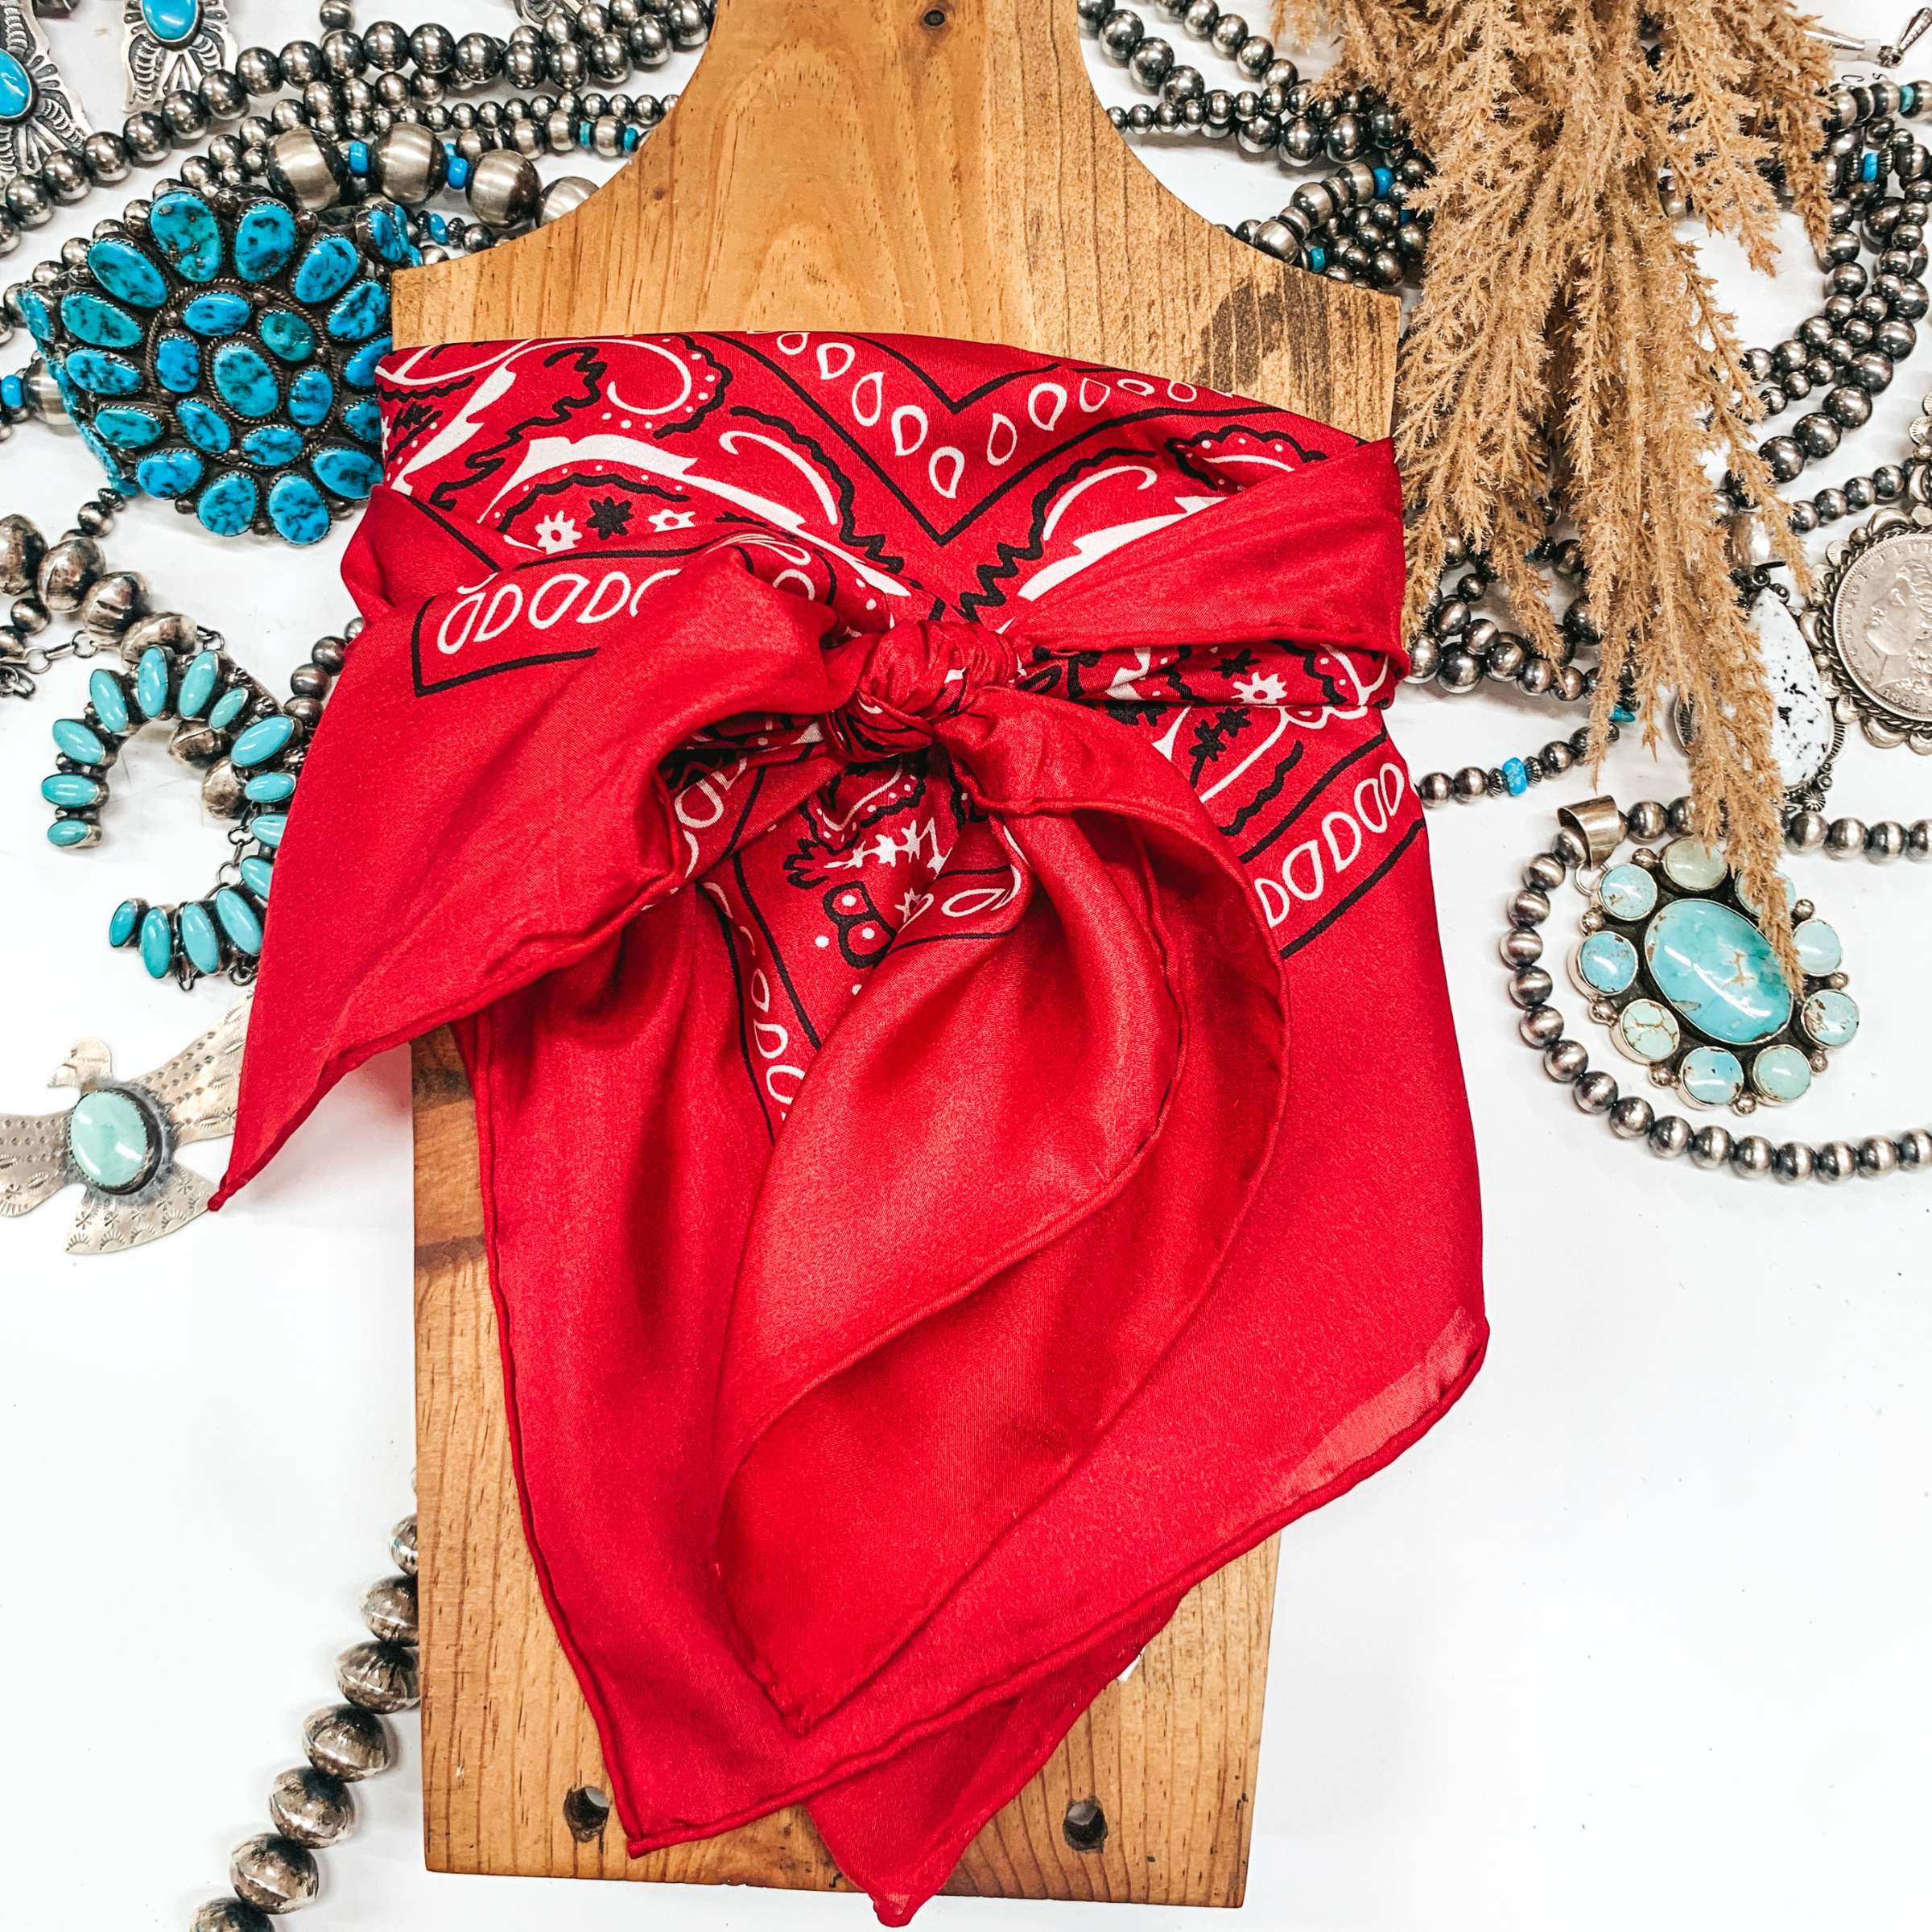 Bandana Wild Rag in Red - Giddy Up Glamour Boutique